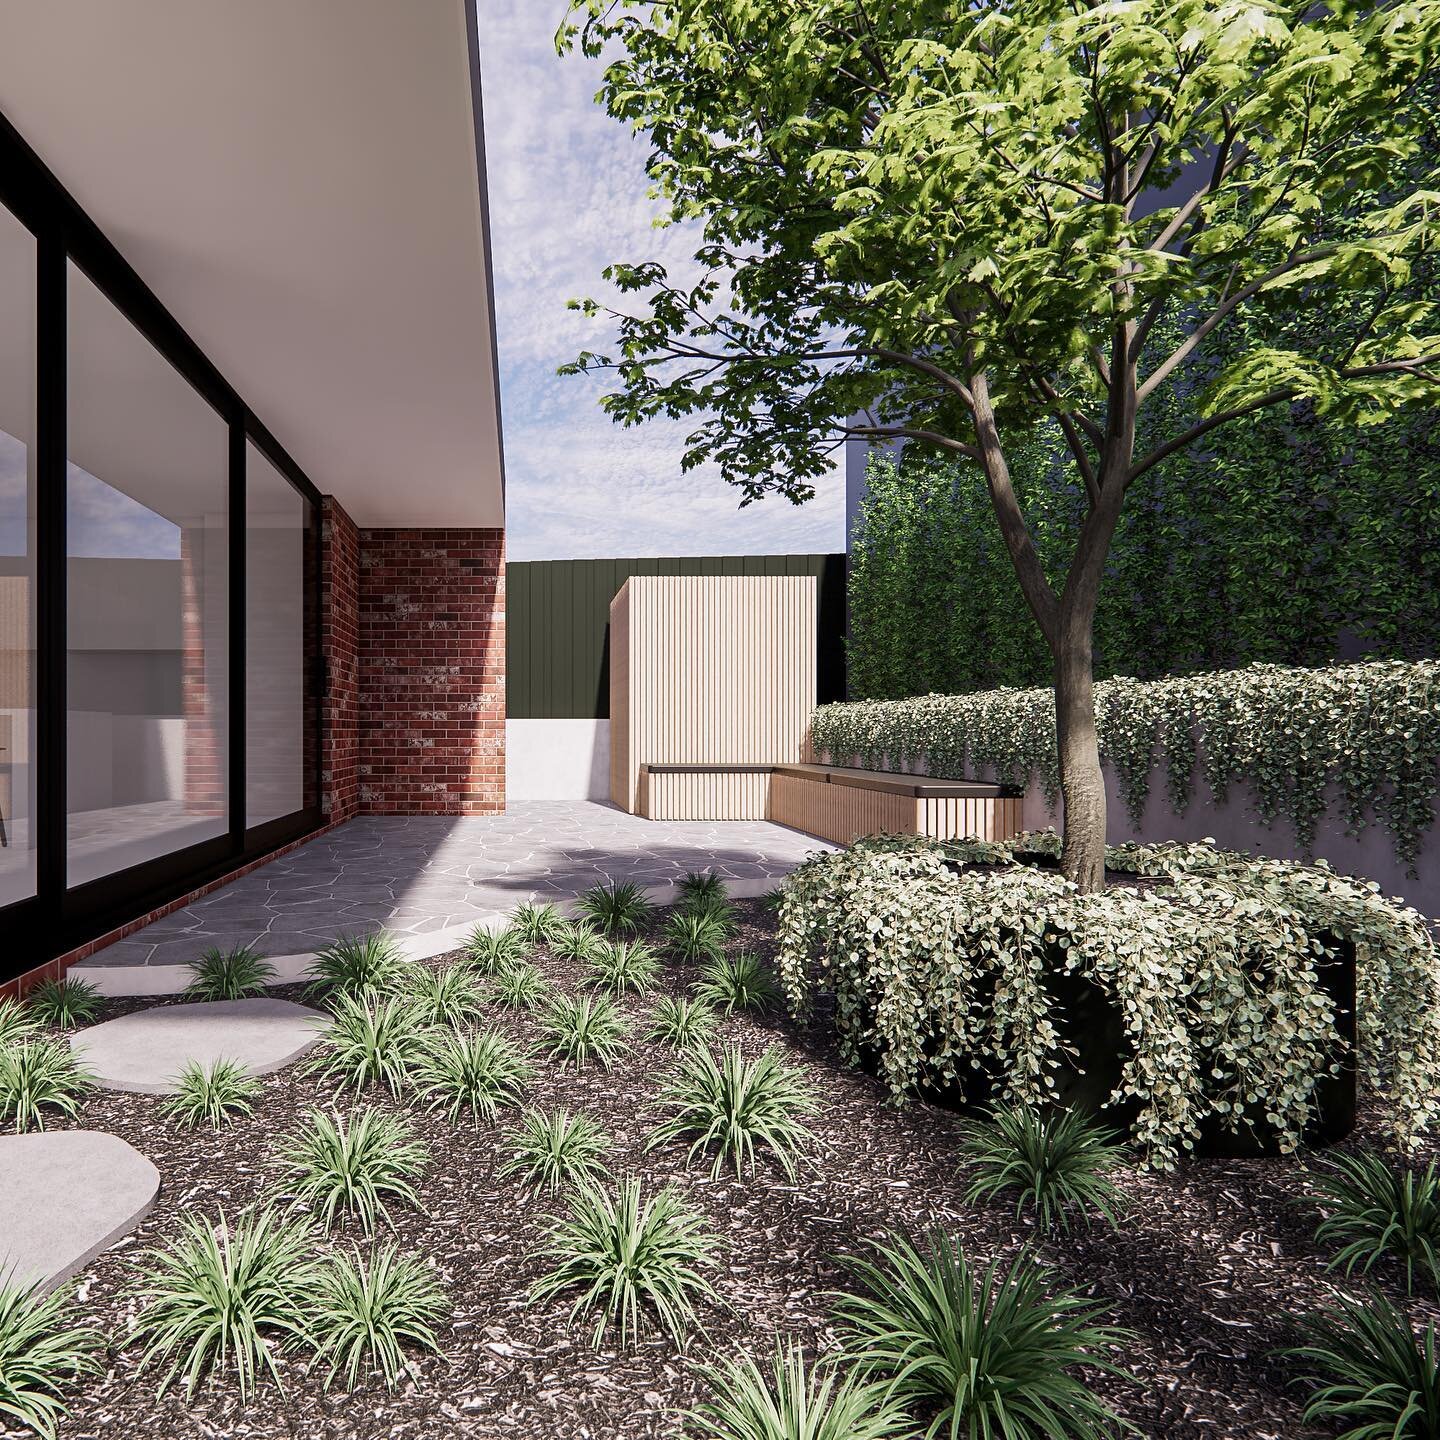 The landscape design is currently underway at our Stott project. 
The initial renders are looking great!
A great collaborative effort with @homes_by_artisan 
.
.
.
.
.
#basebuildingdesign #homedesign #landscapedesign #buildingdesign #architecture #au